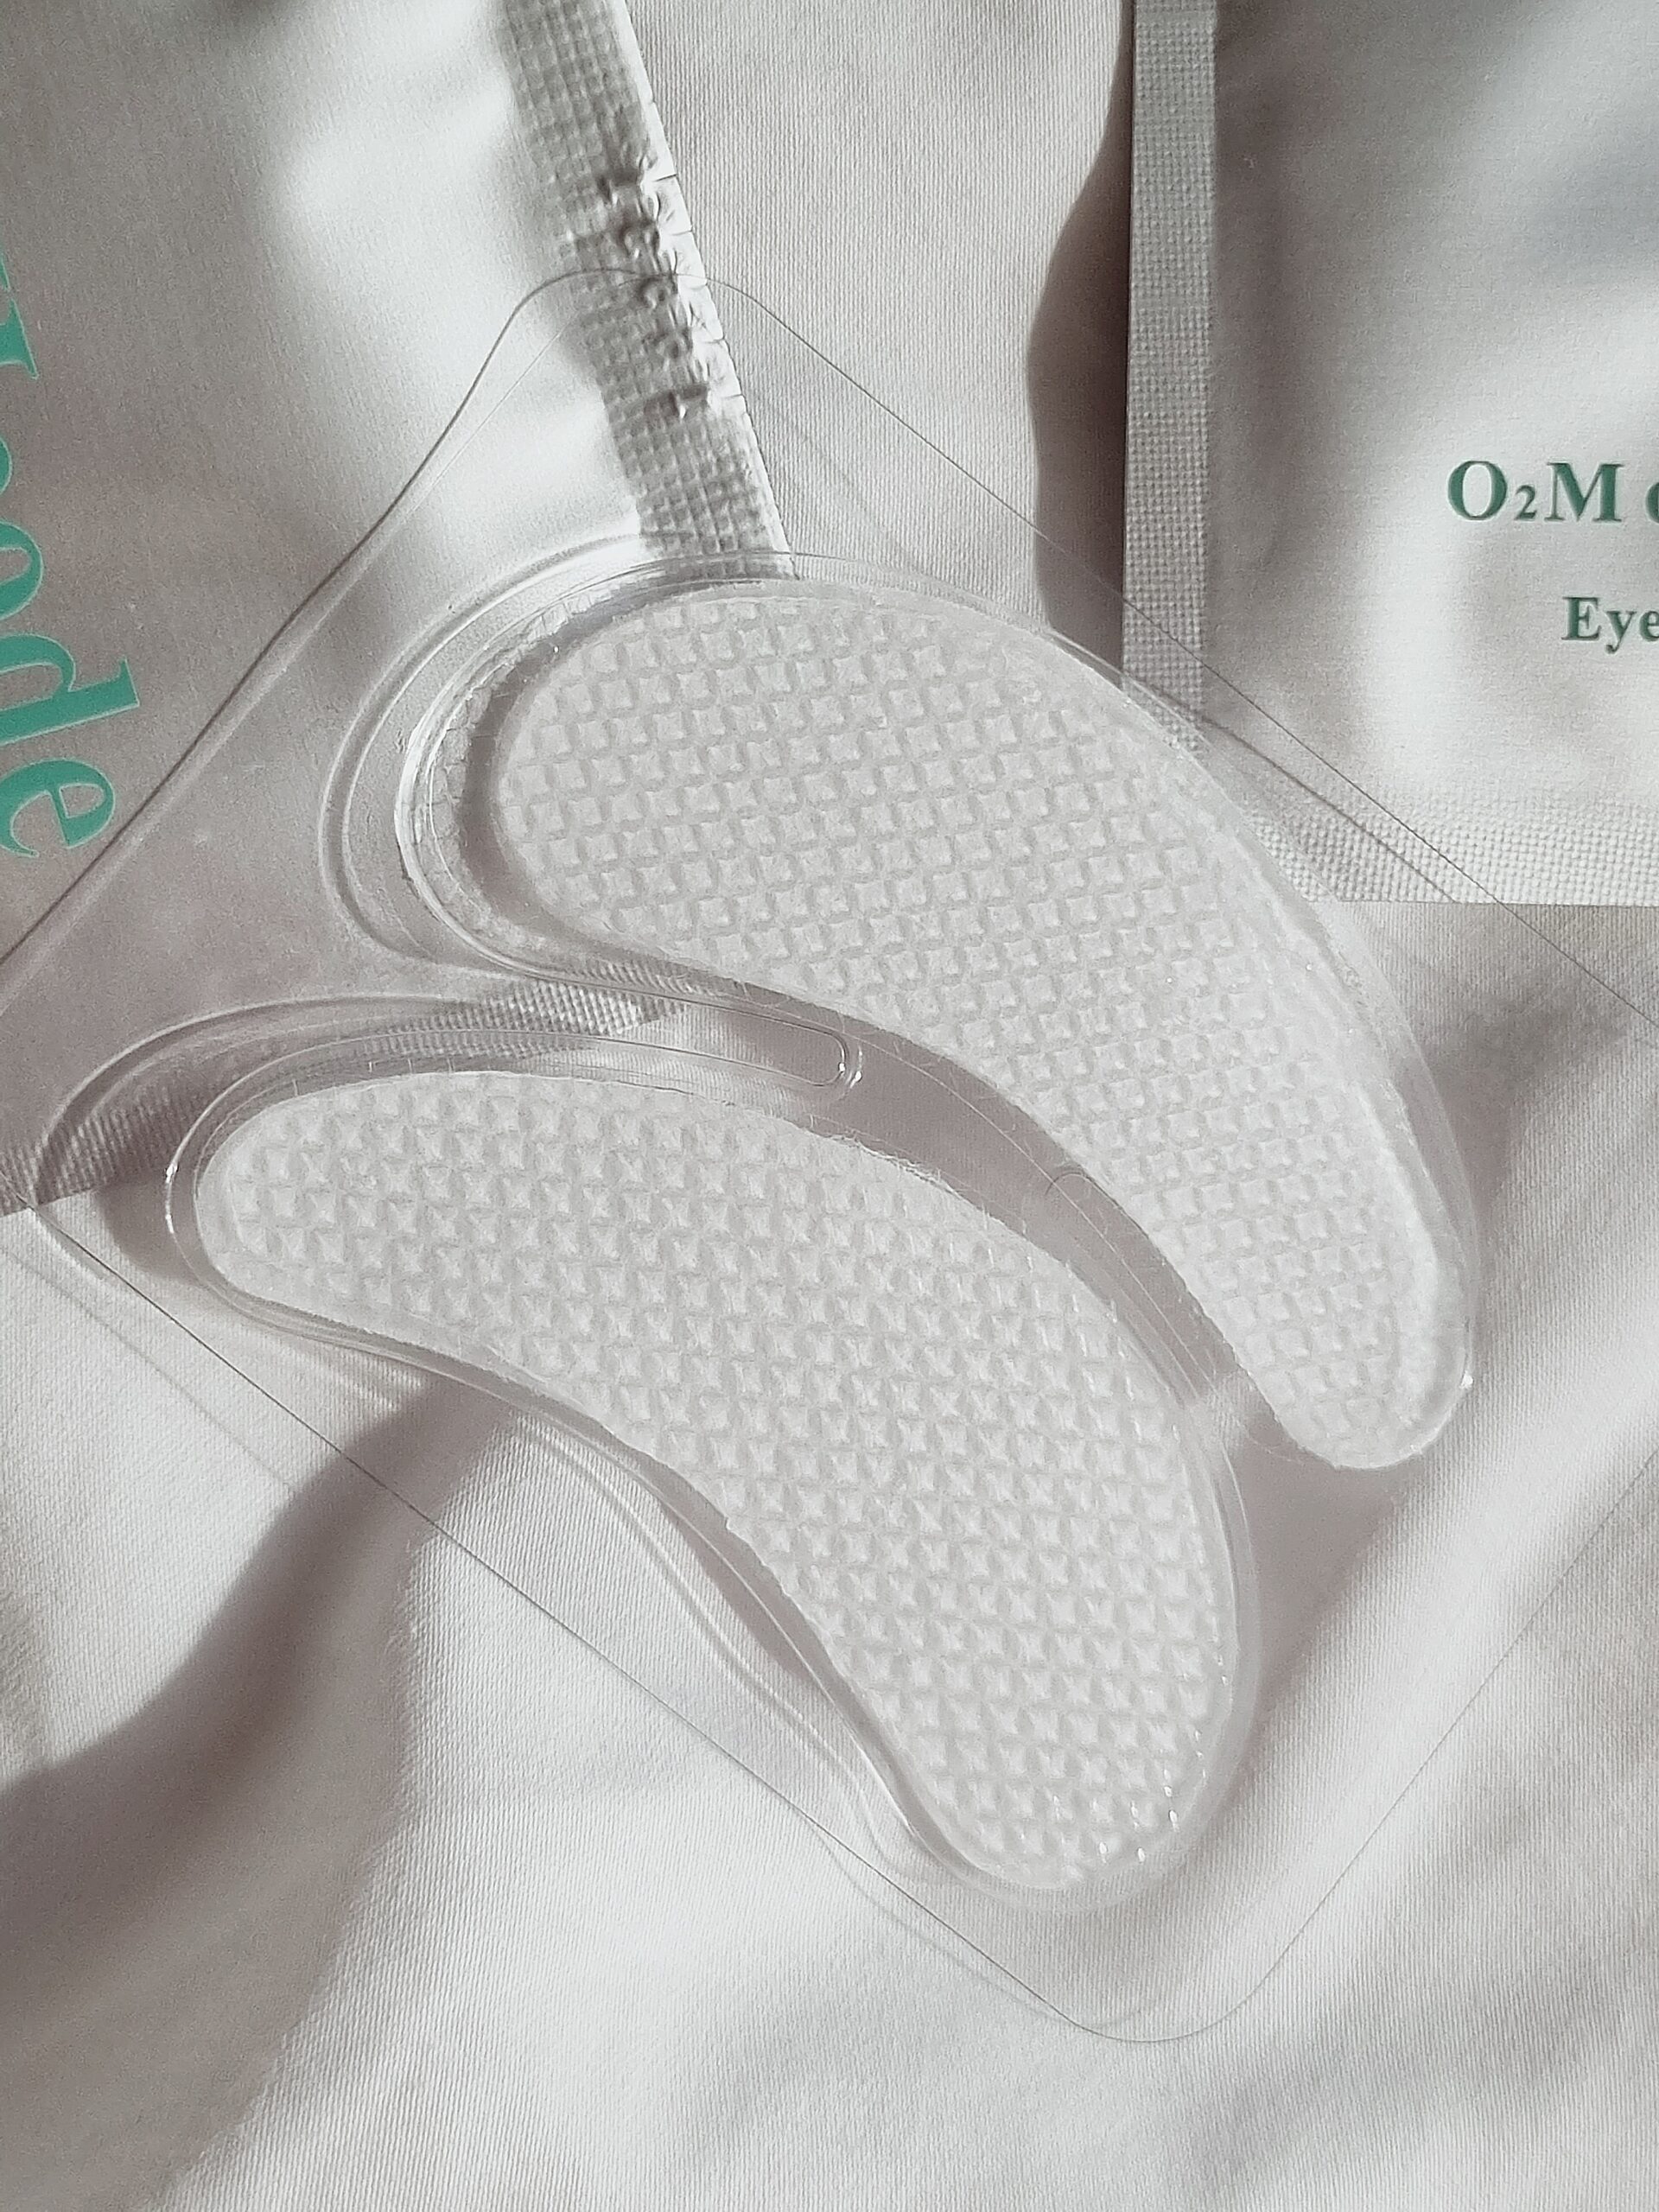 All Night Repair with VIIcode O2M Oxygen Eye Mask